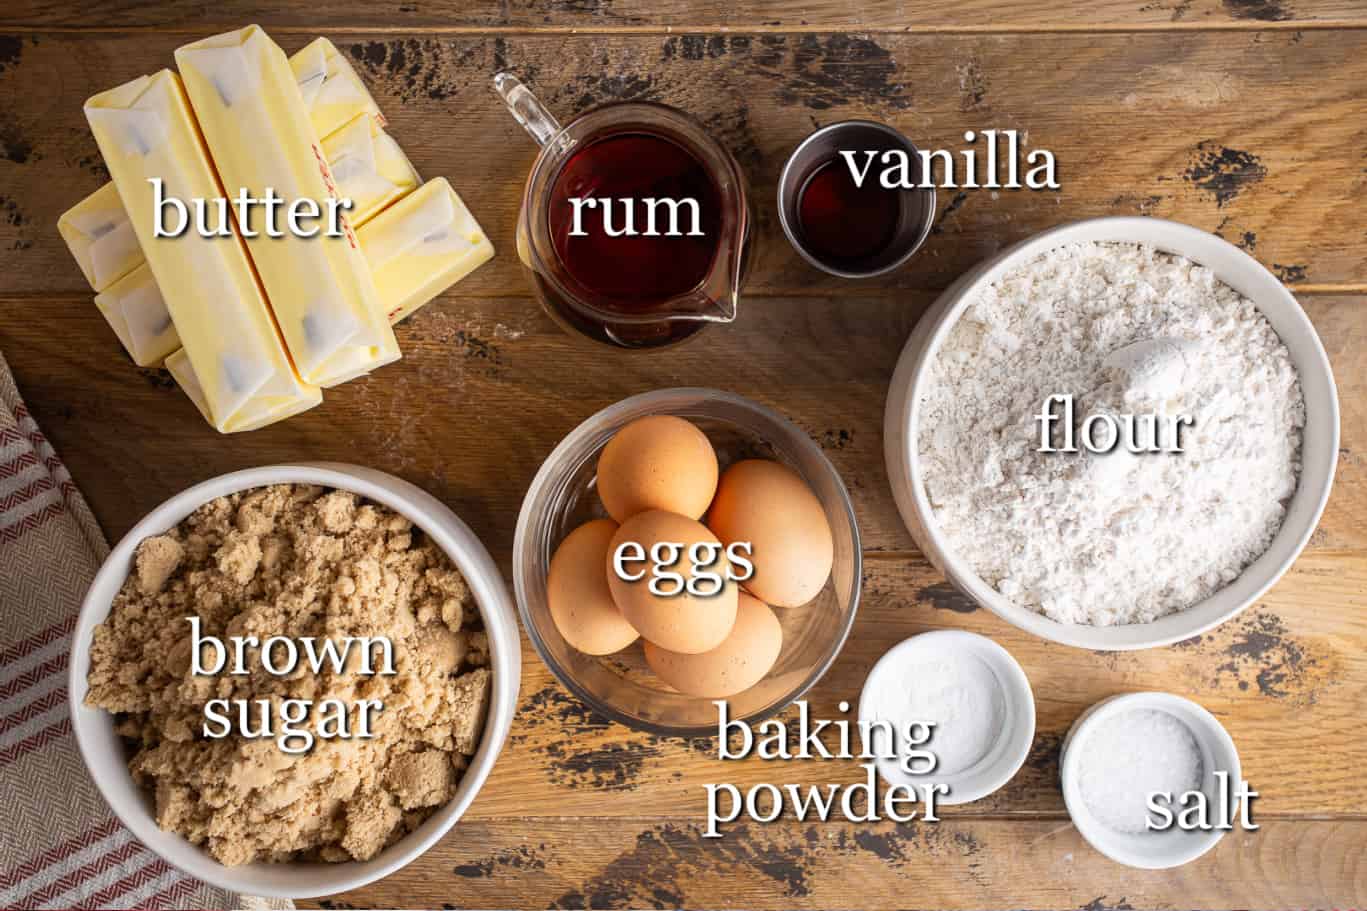 Ingredients for making rum cake, with text labels.